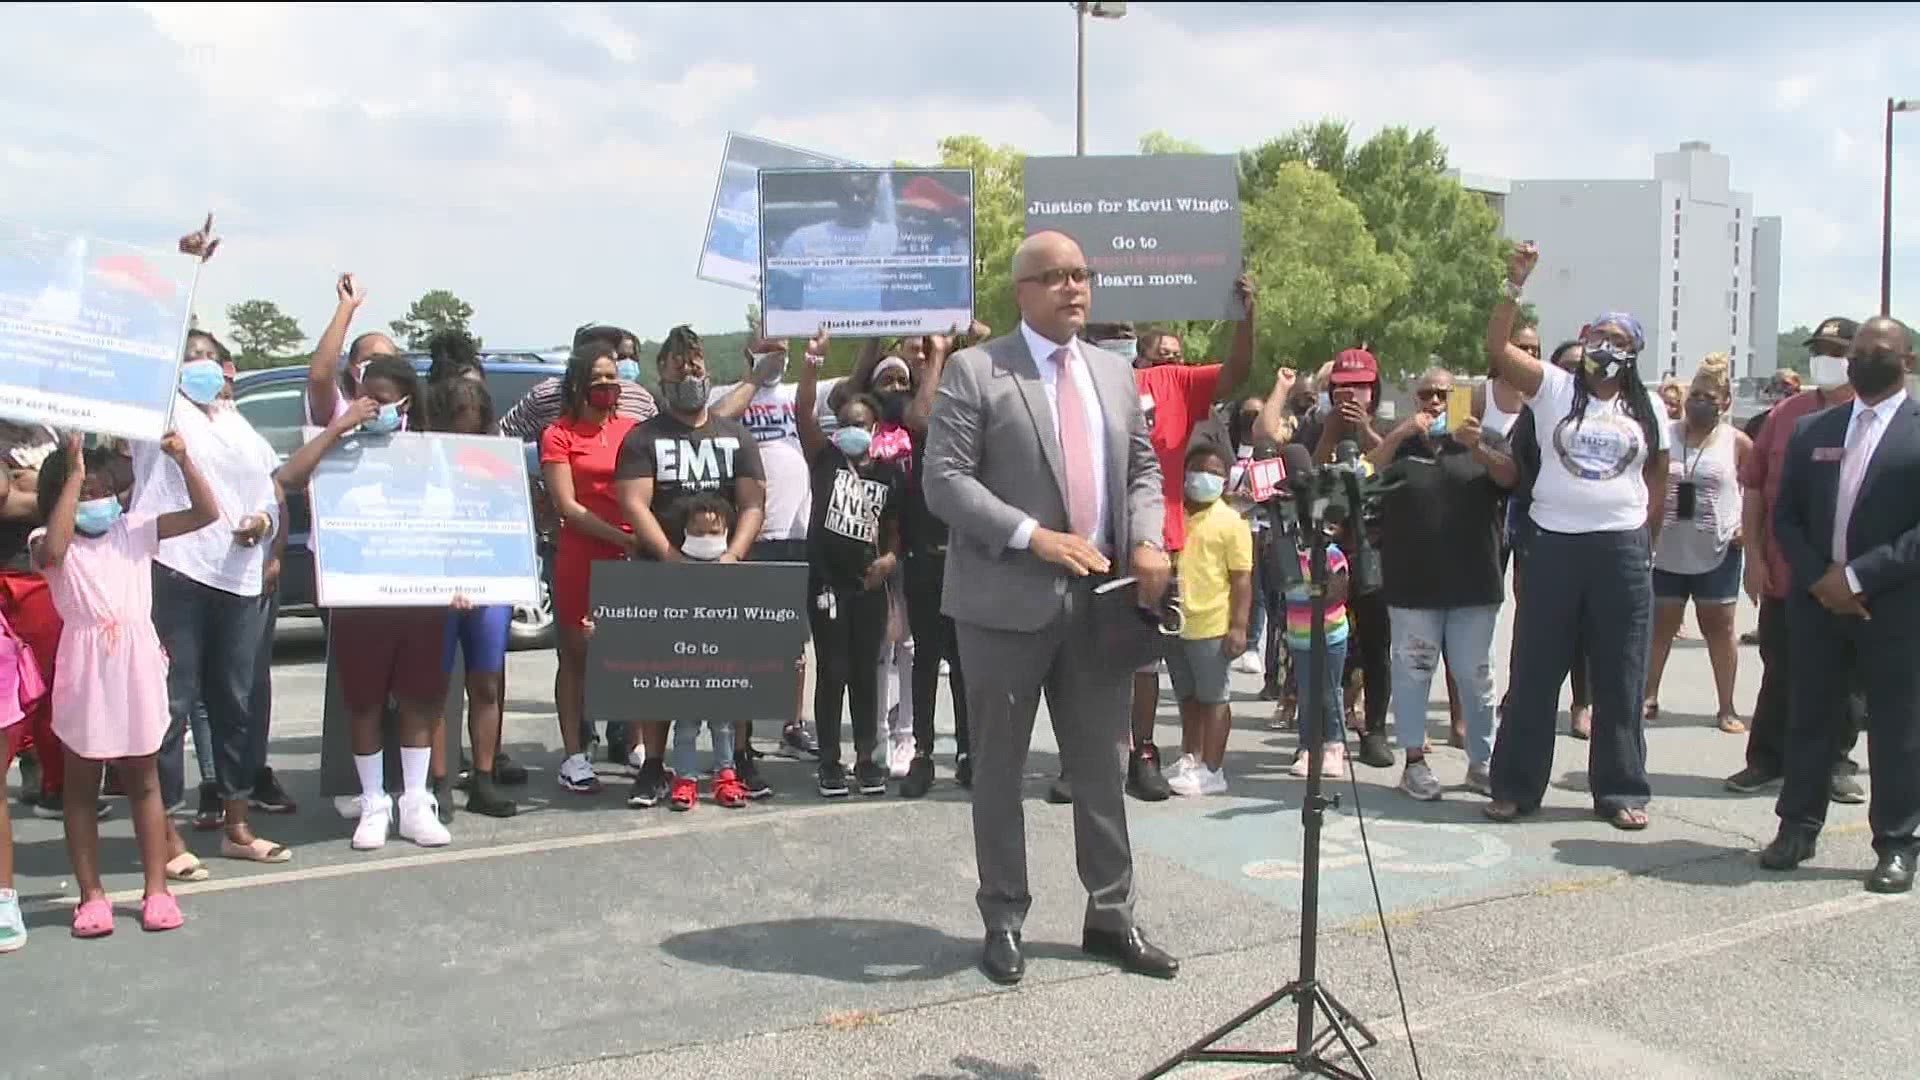 A press conference was held Thursday afternoon at the jail, officially called the Cobb County Adult Detention Center.